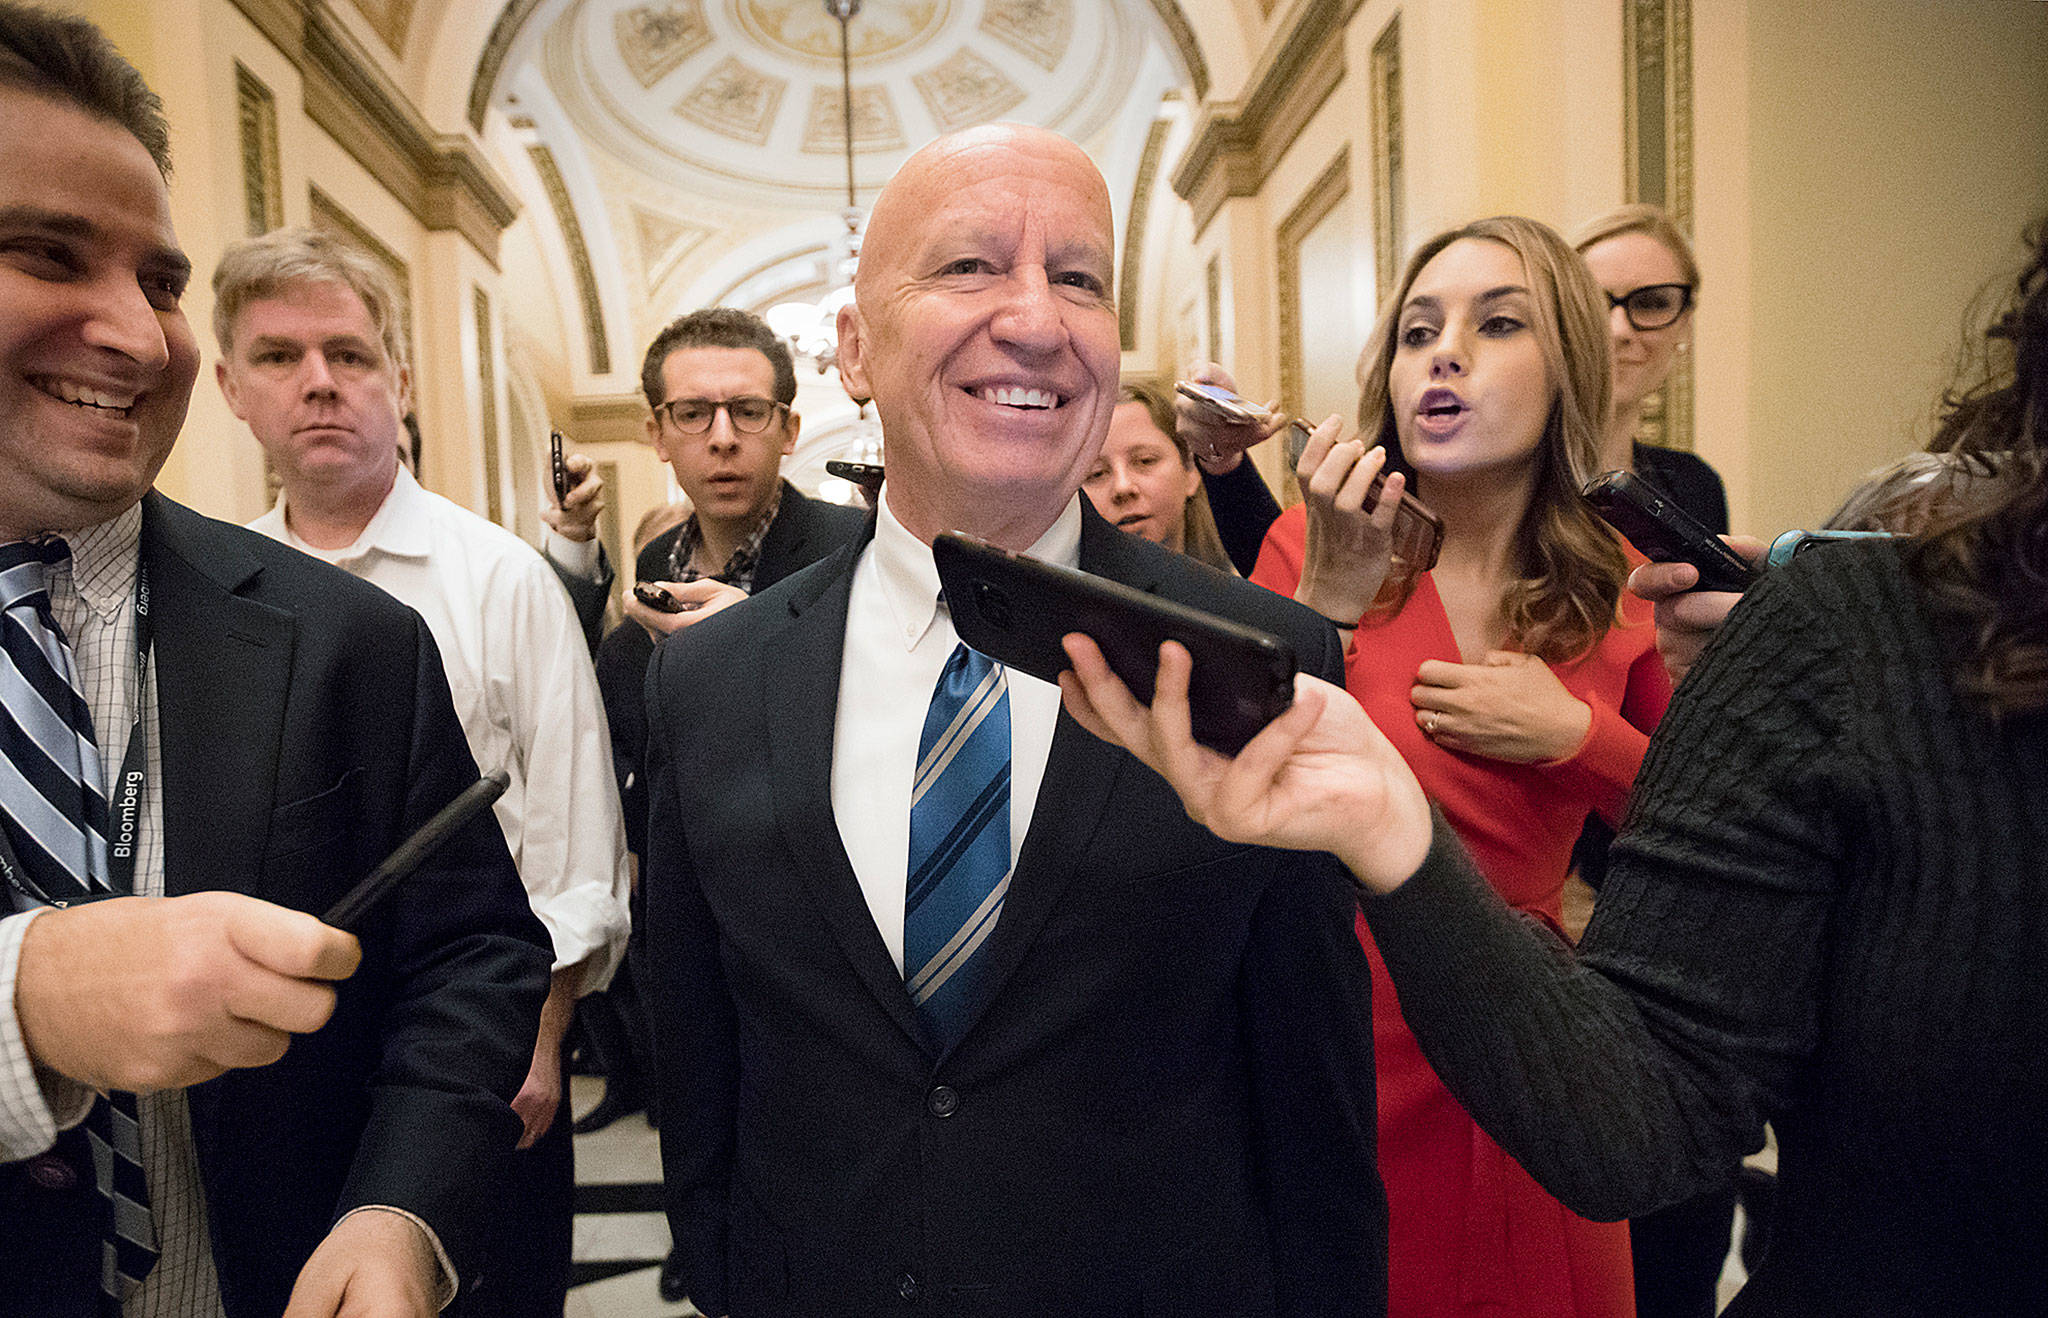 House Ways and Means Committee Chairman Kevin Brady, R-Texas, is pursued by reporters in the Capitol after signing the conference committee report to advance the GOP tax bill Friday. (AP Photo/J. Scott Applewhite)